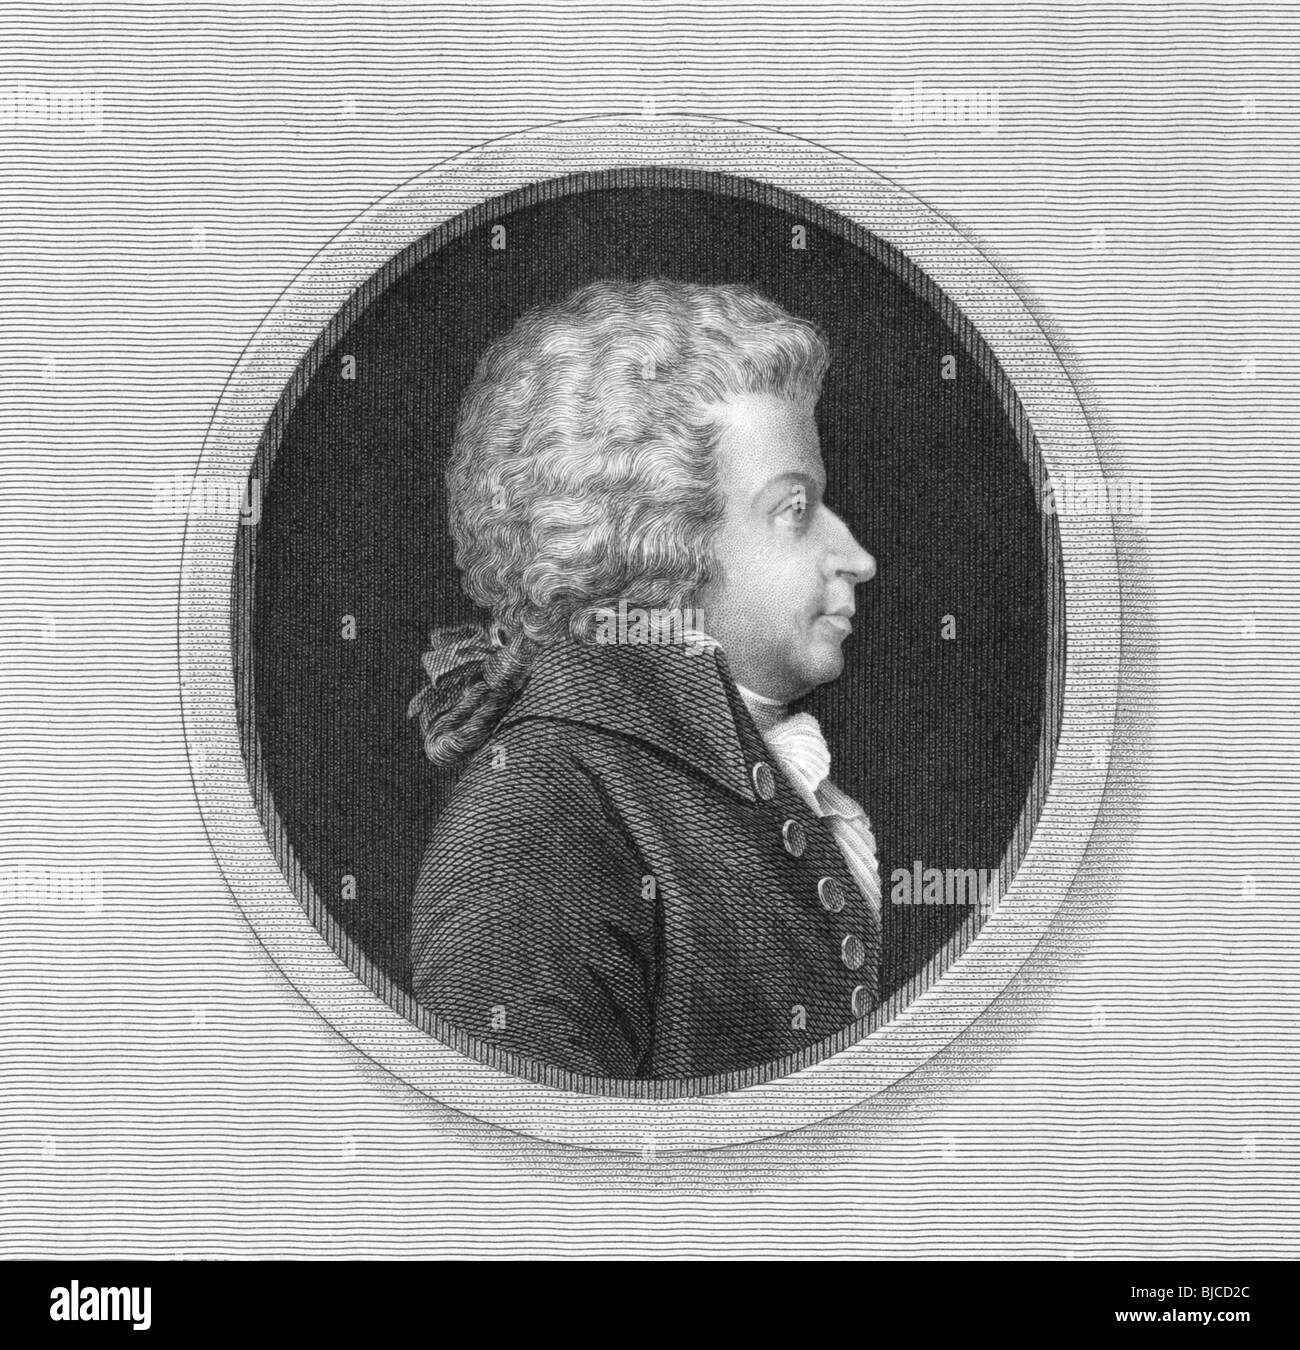 Wolfgang Amadeus Mozart (1756-1791) on engraving from the 1800s. One of the most significant and influential music composers. Stock Photo